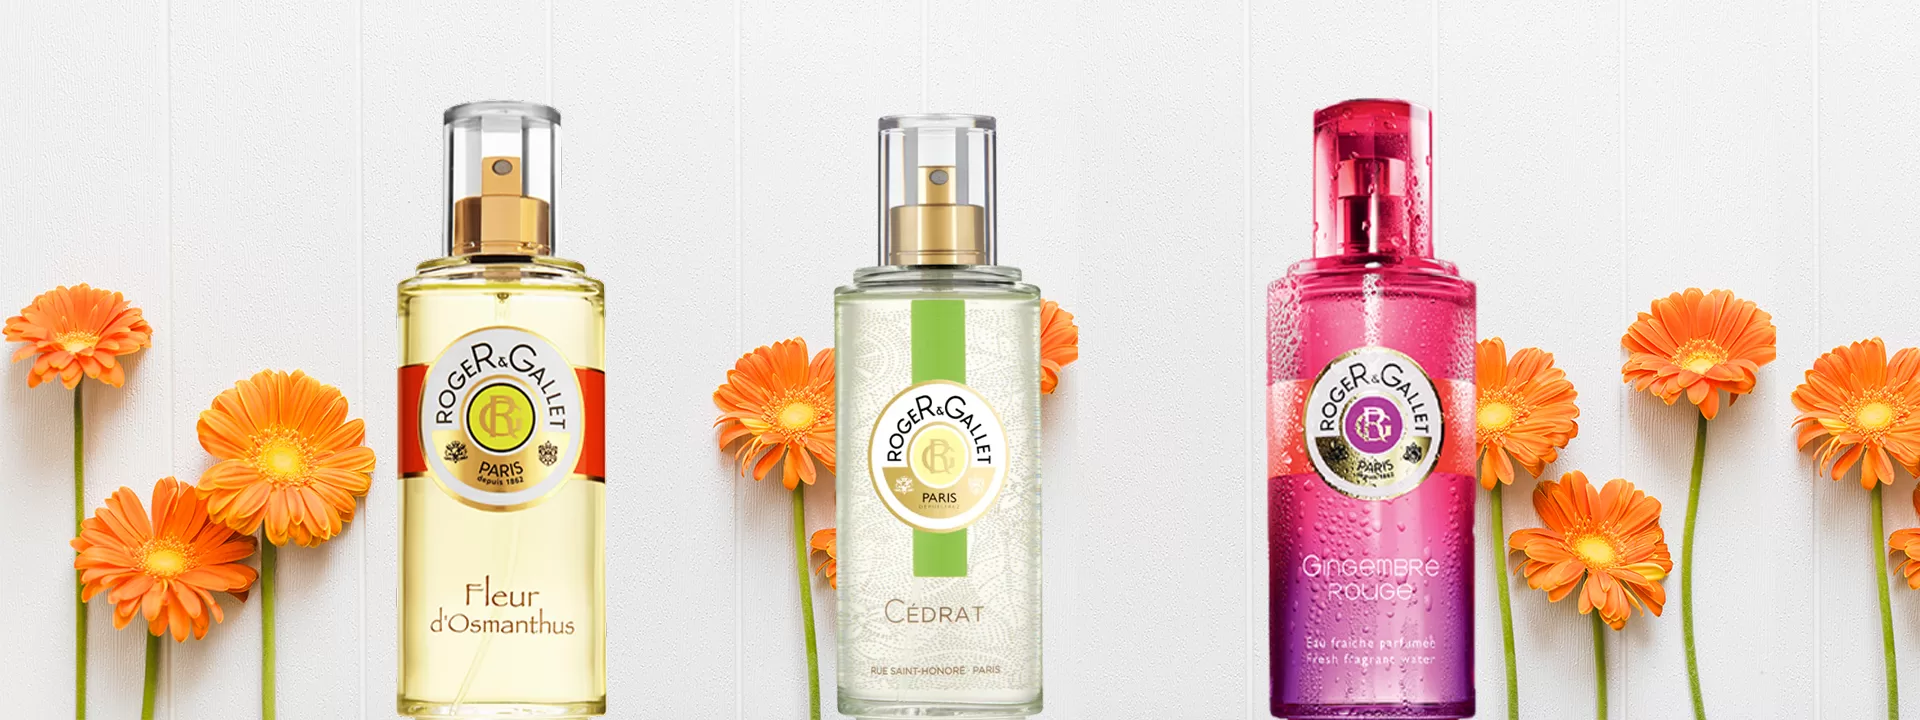 The Ultimate Guide To The Roger & Gallet Fragrances